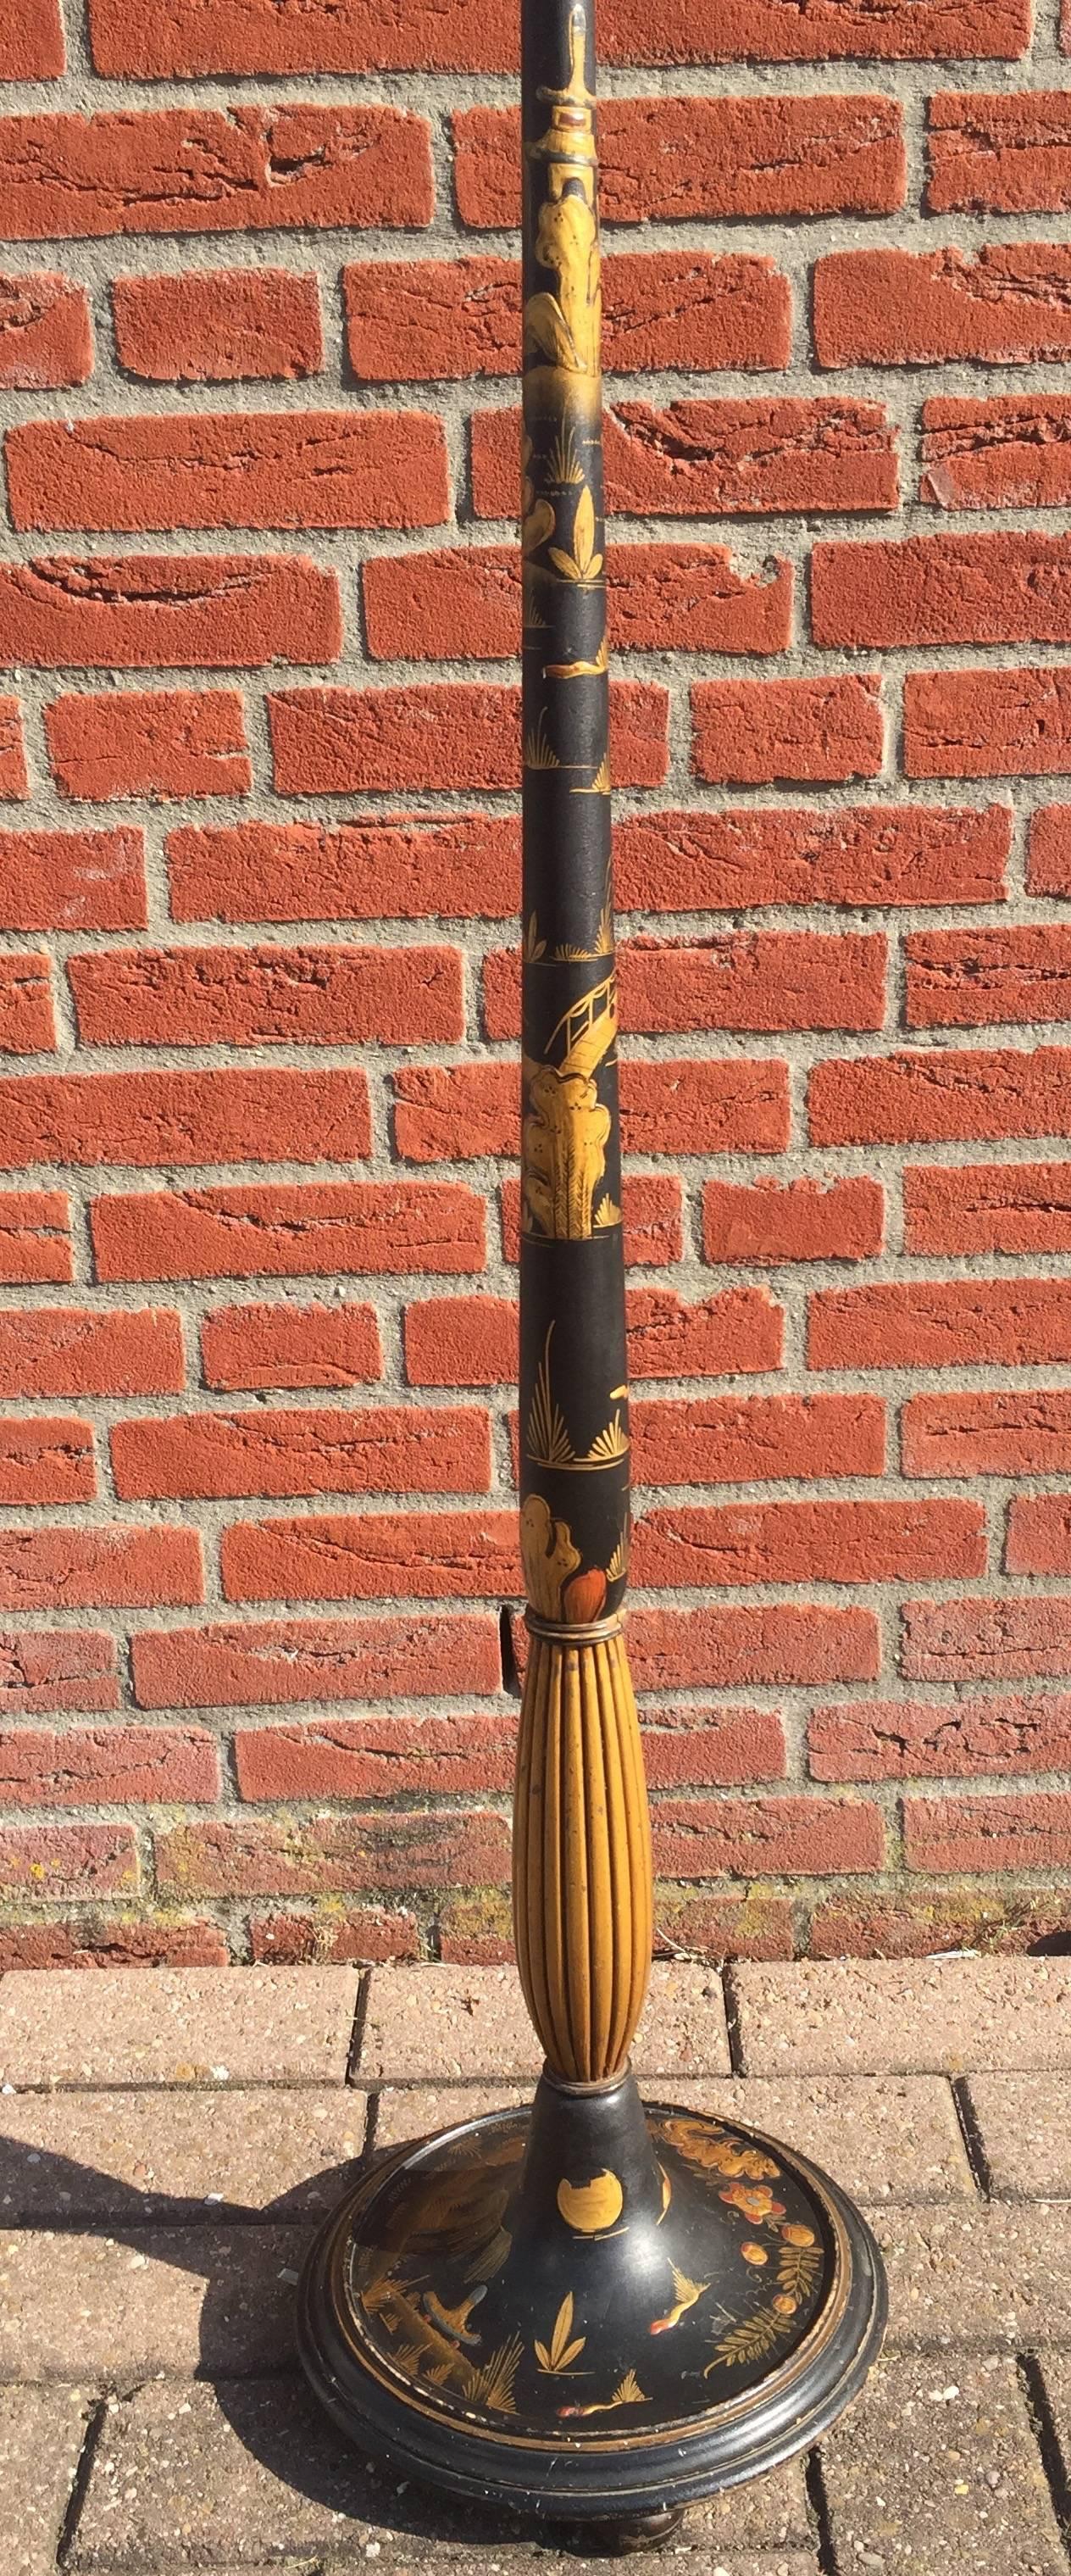 20th Century Early 1900s Wooden Chinoiserie Floor Lamp with Lacquer Decor and Chinese Motifs